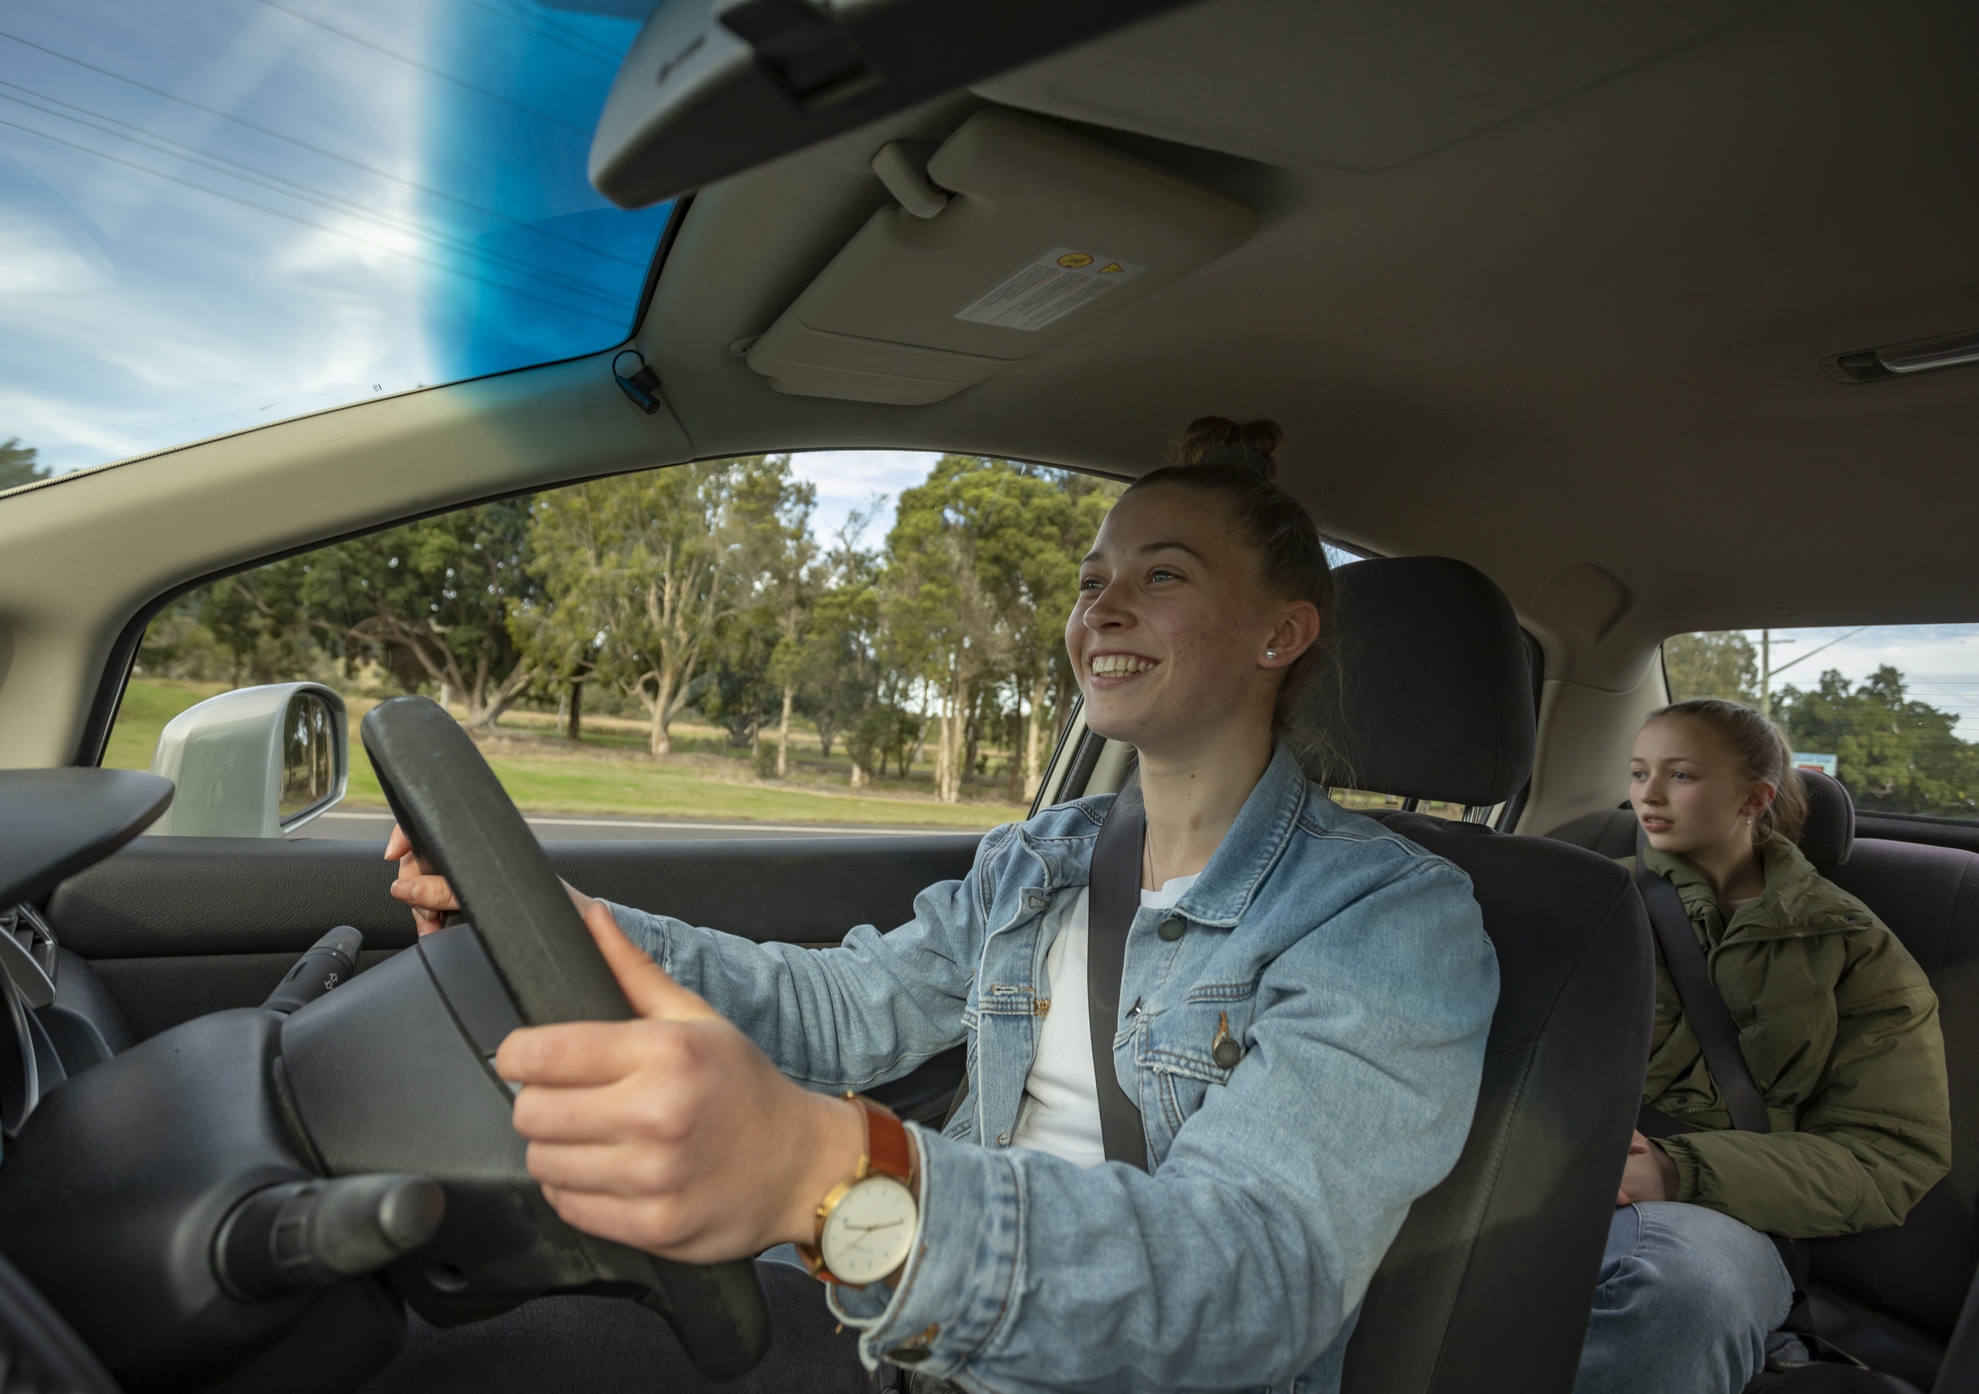 Young drivers respond to verbal feedback about their driving better than they do to written feedback or technology. Photo: Getty Images